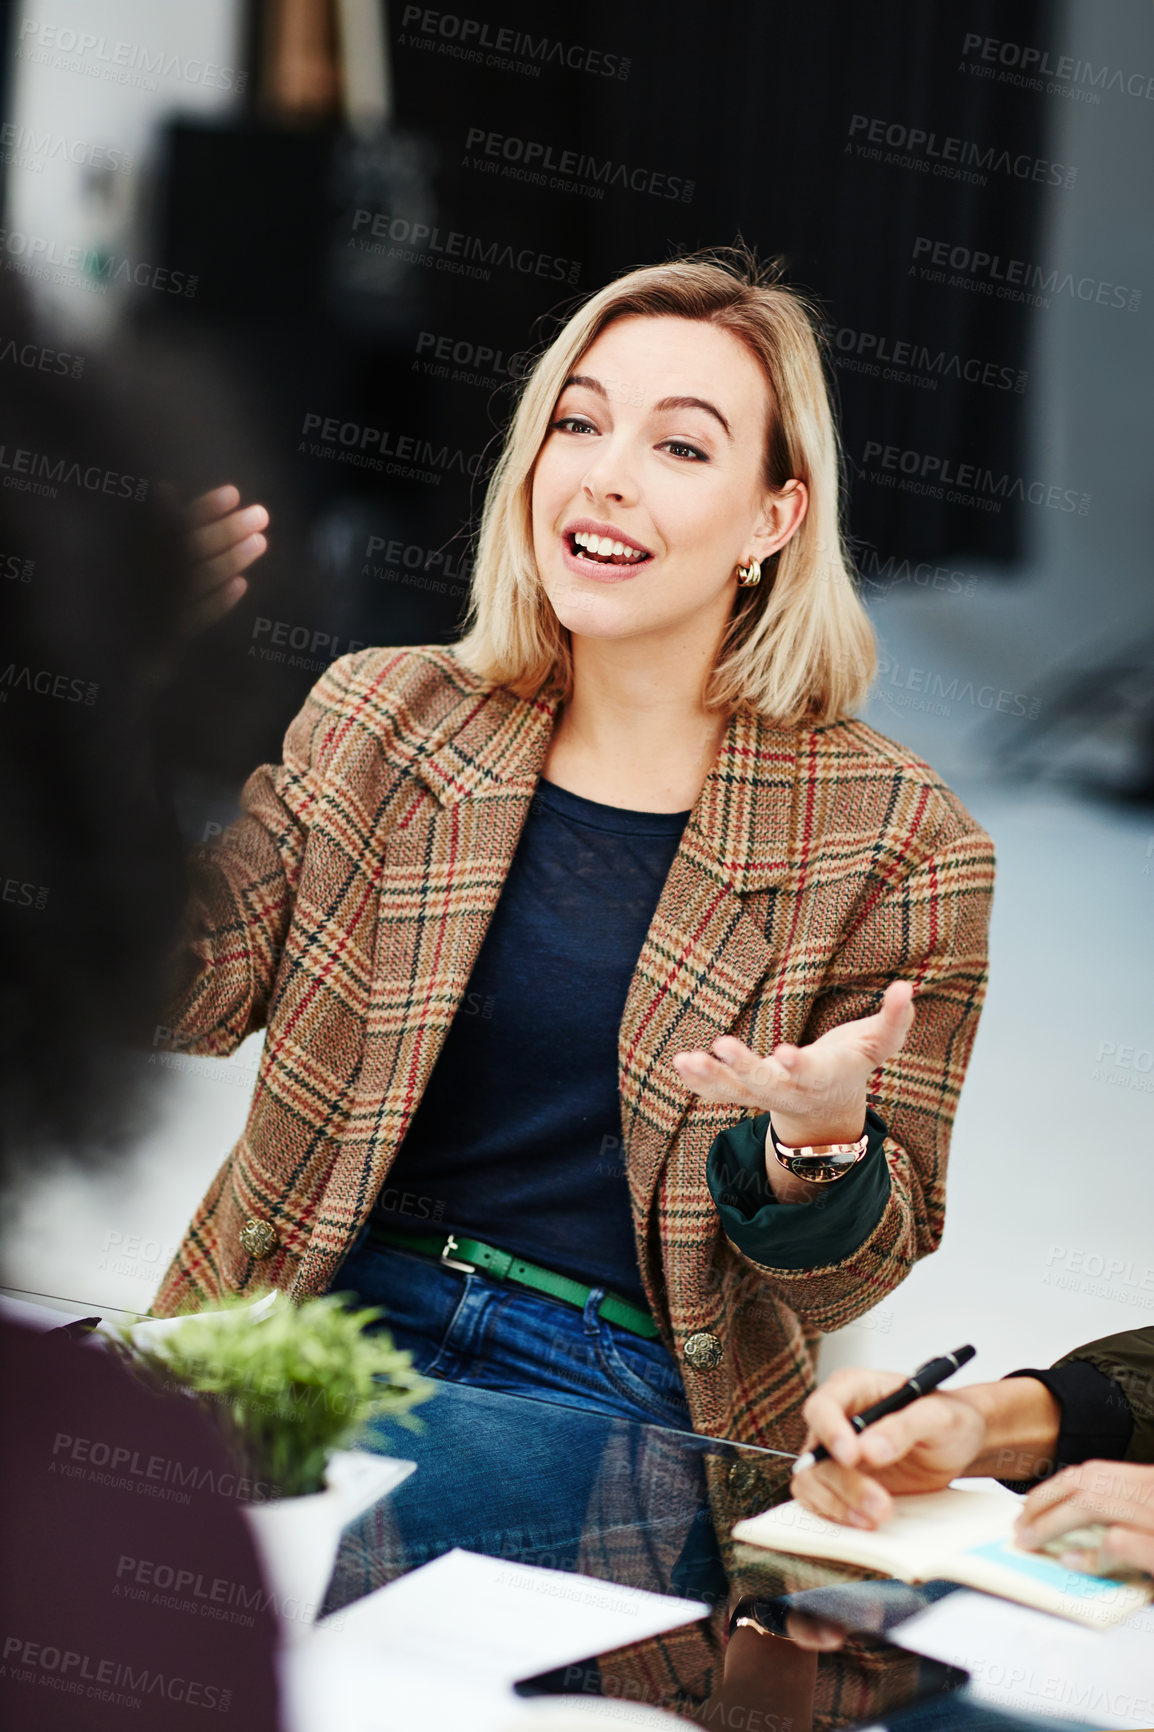 Buy stock photo Confident, trendy and smiling businesswoman talking in meeting sharing her creative marketing ideas. Stylish team leader having a friendly staff discussion about project plans and job task management